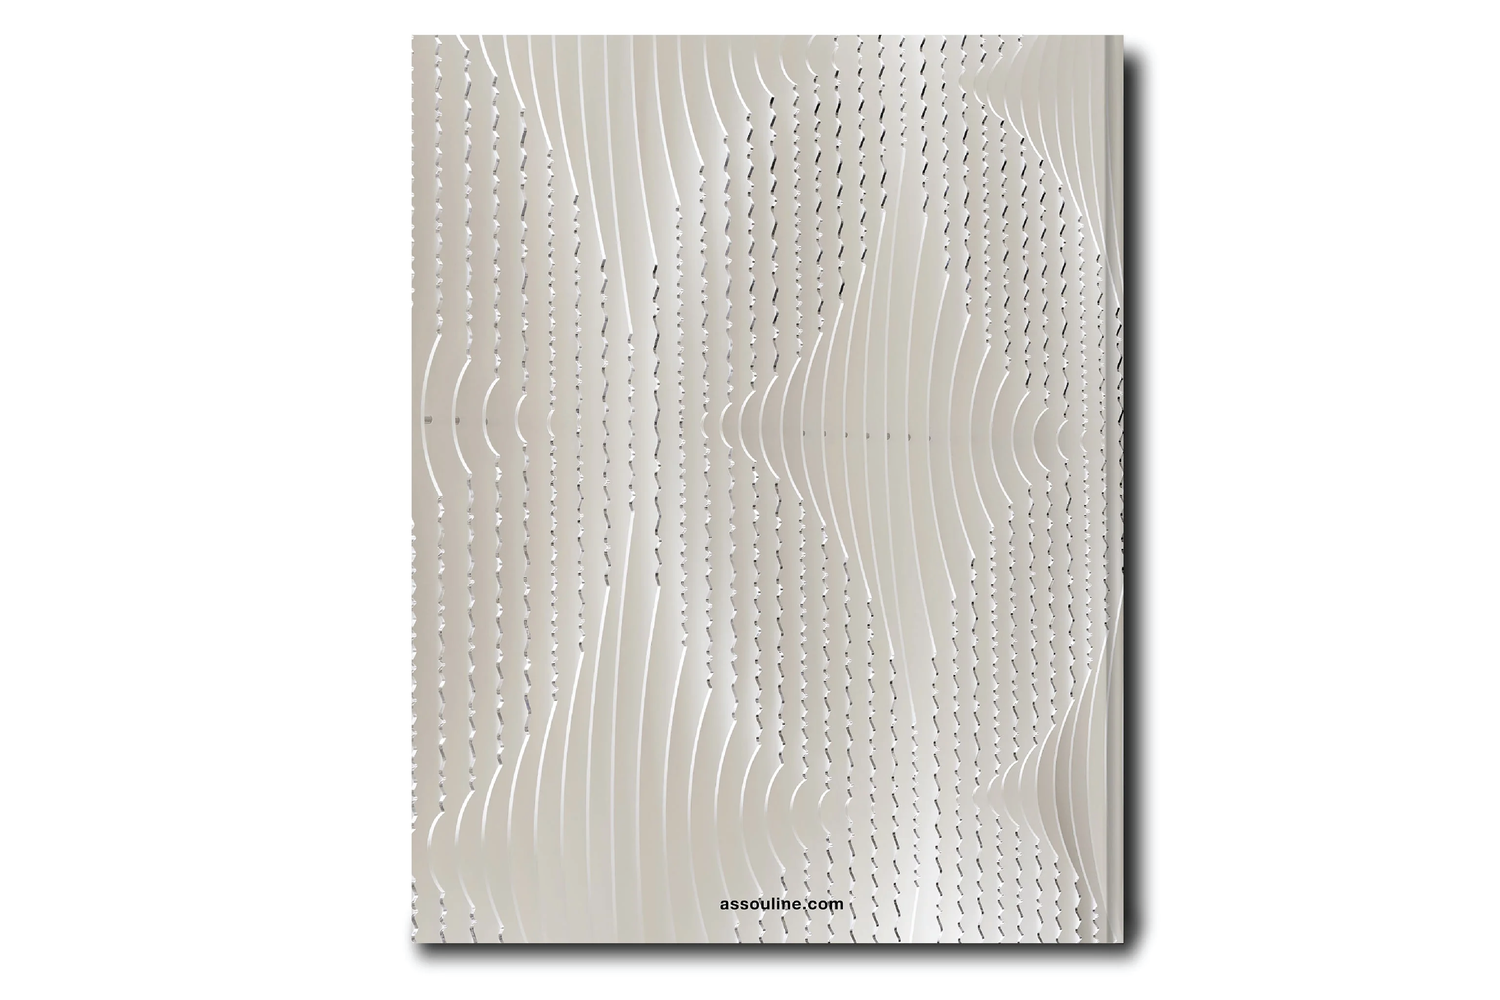 Louis Vuitton Skin: Architecture of Luxury NYC - Art of Living - Books and  Stationery